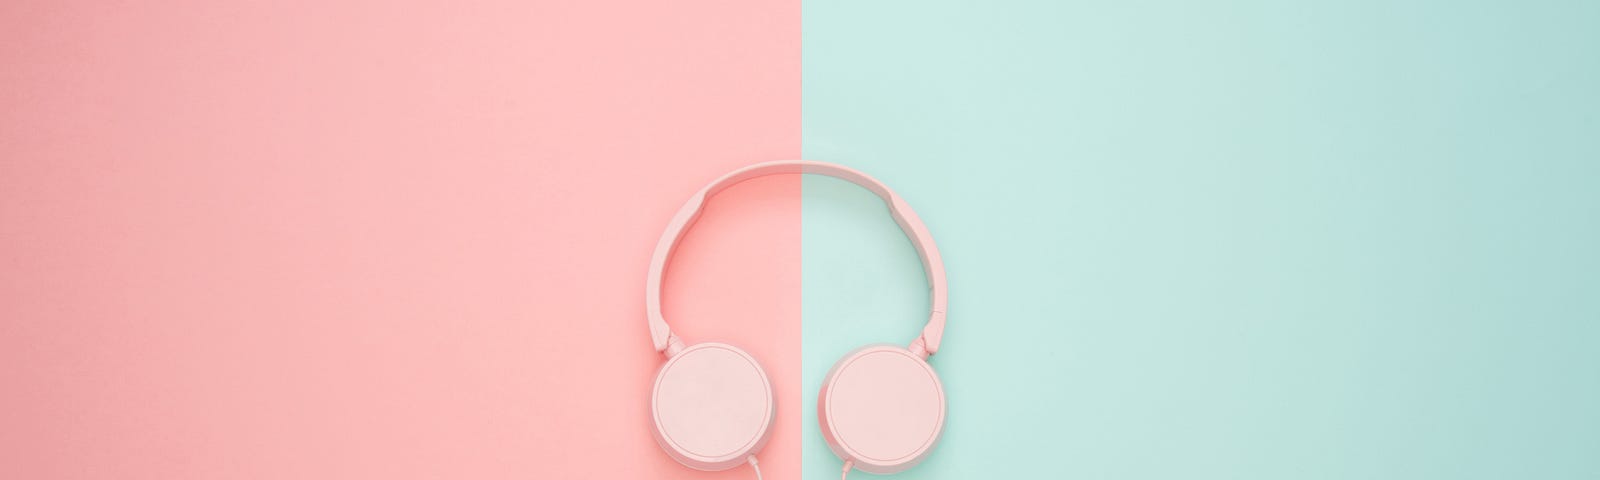 Pink headphones on a pink and blue background